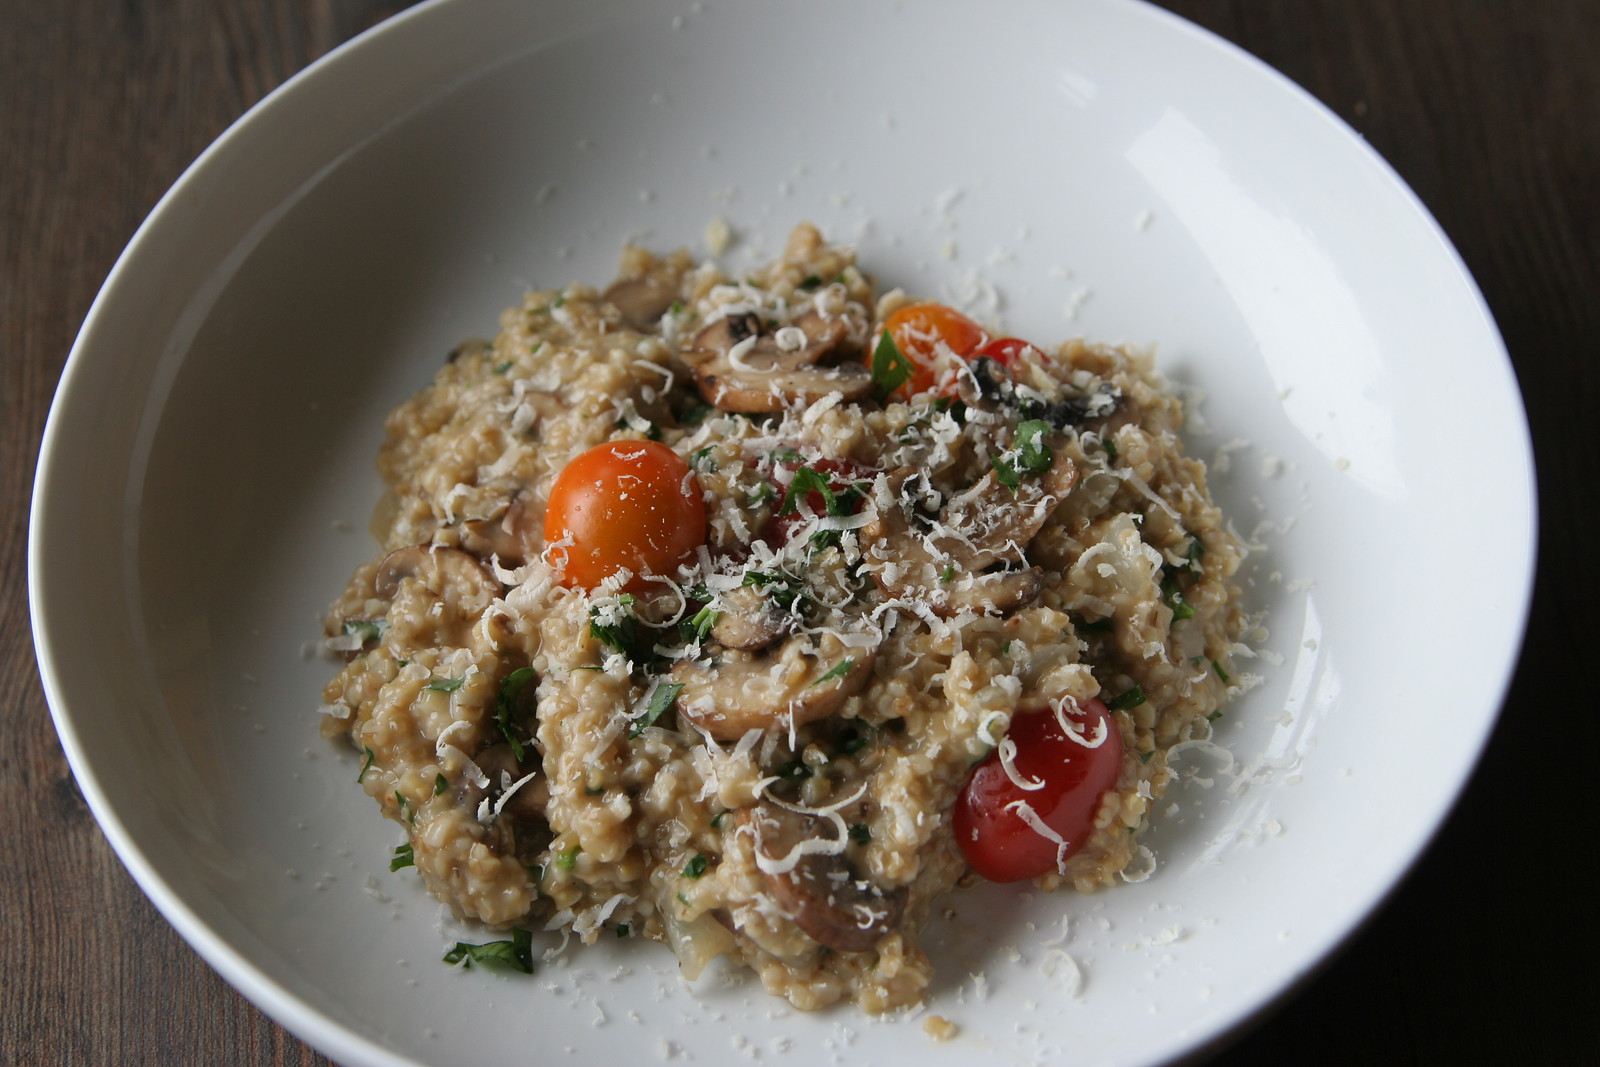 Mushroom and Tomato Oat Risotto - we eat. live. do. well